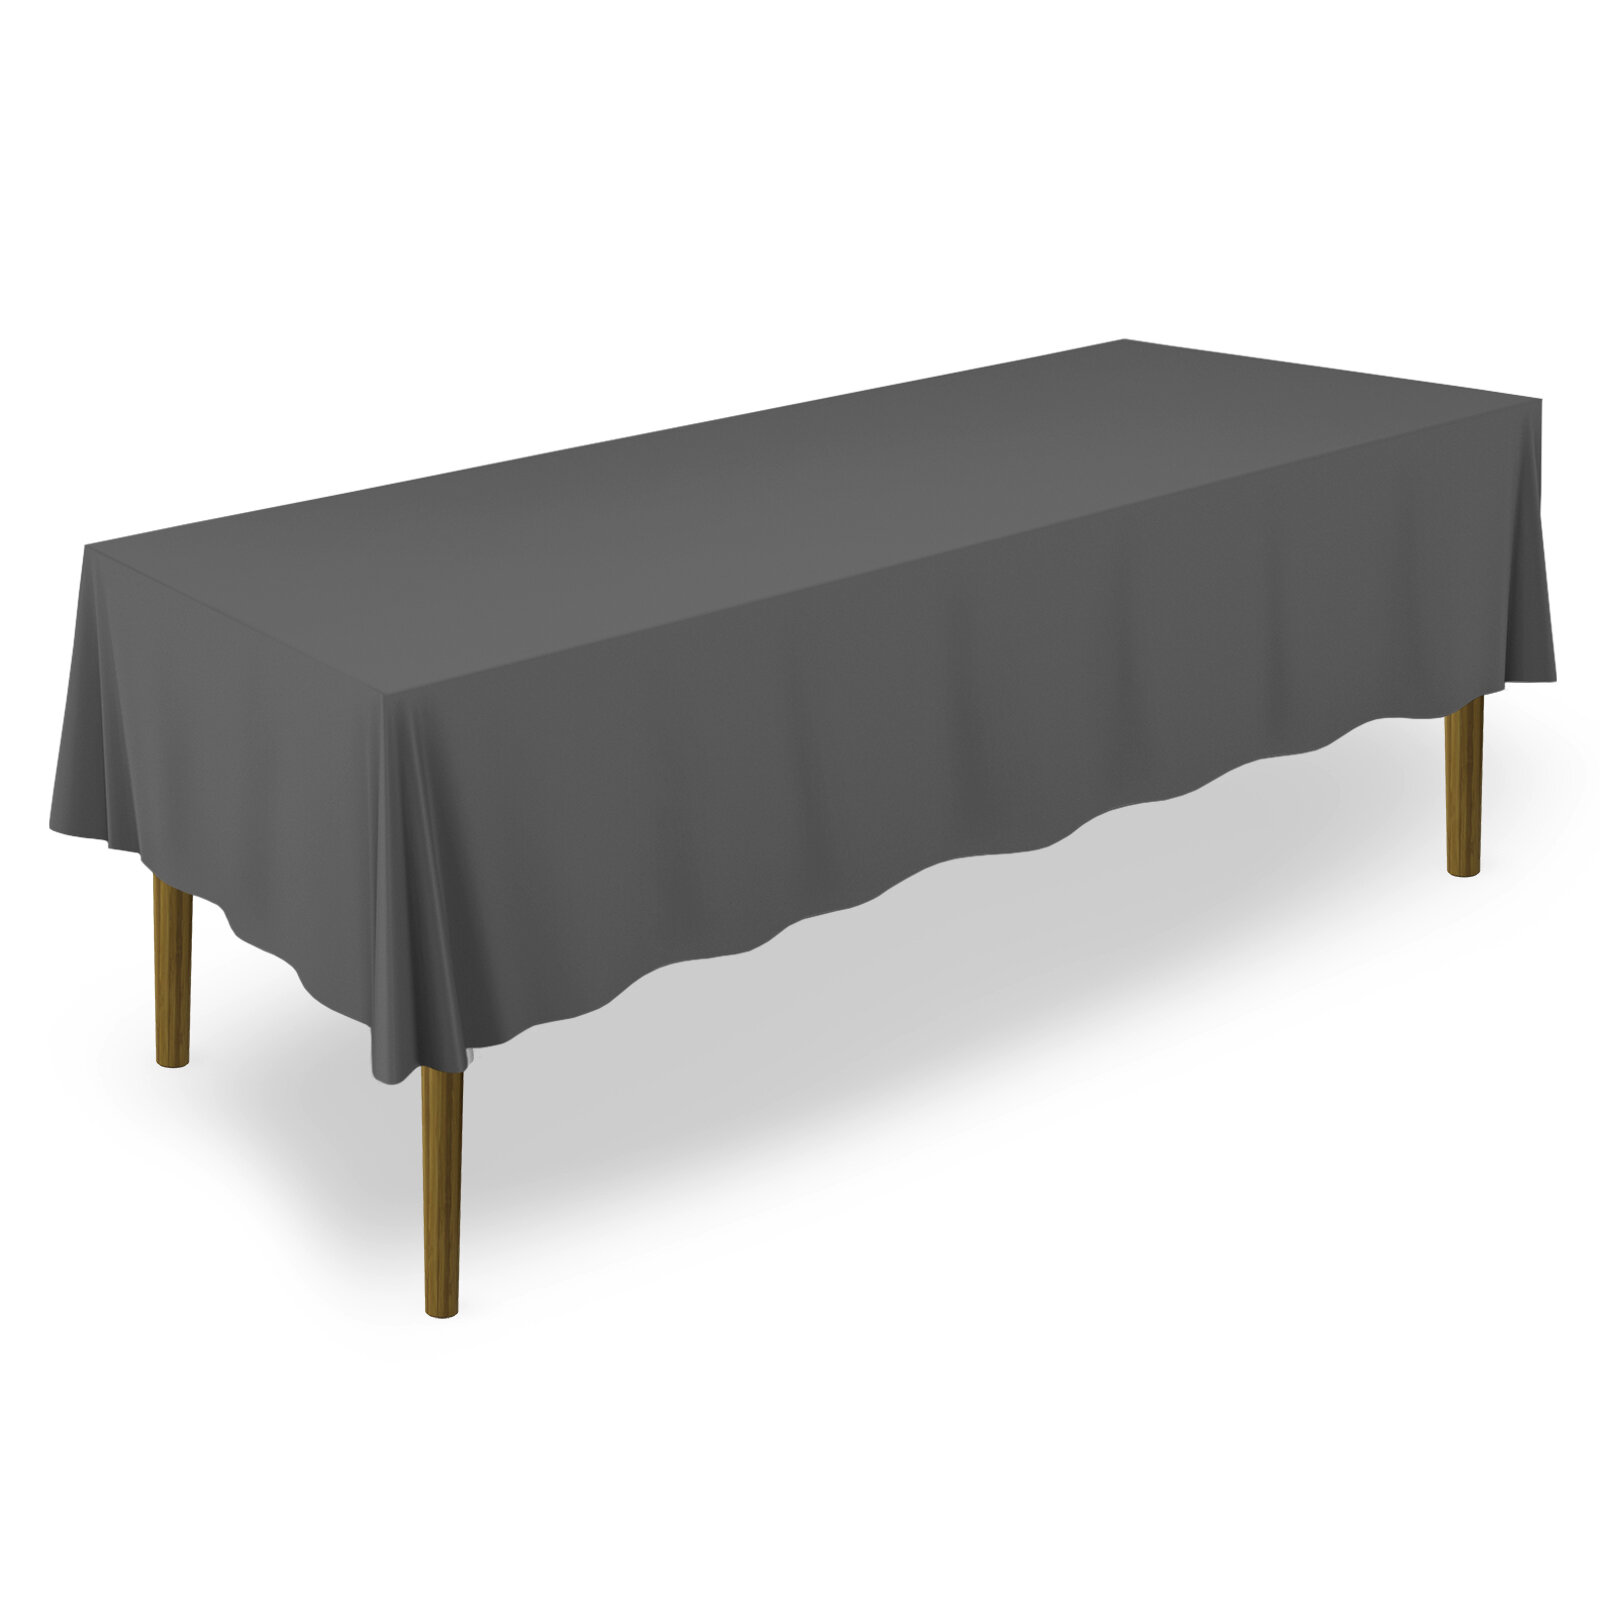 30 packs 126x60 inch Seamless Rectanglar Polyester Tablecloth Banquet 3 COLORS 